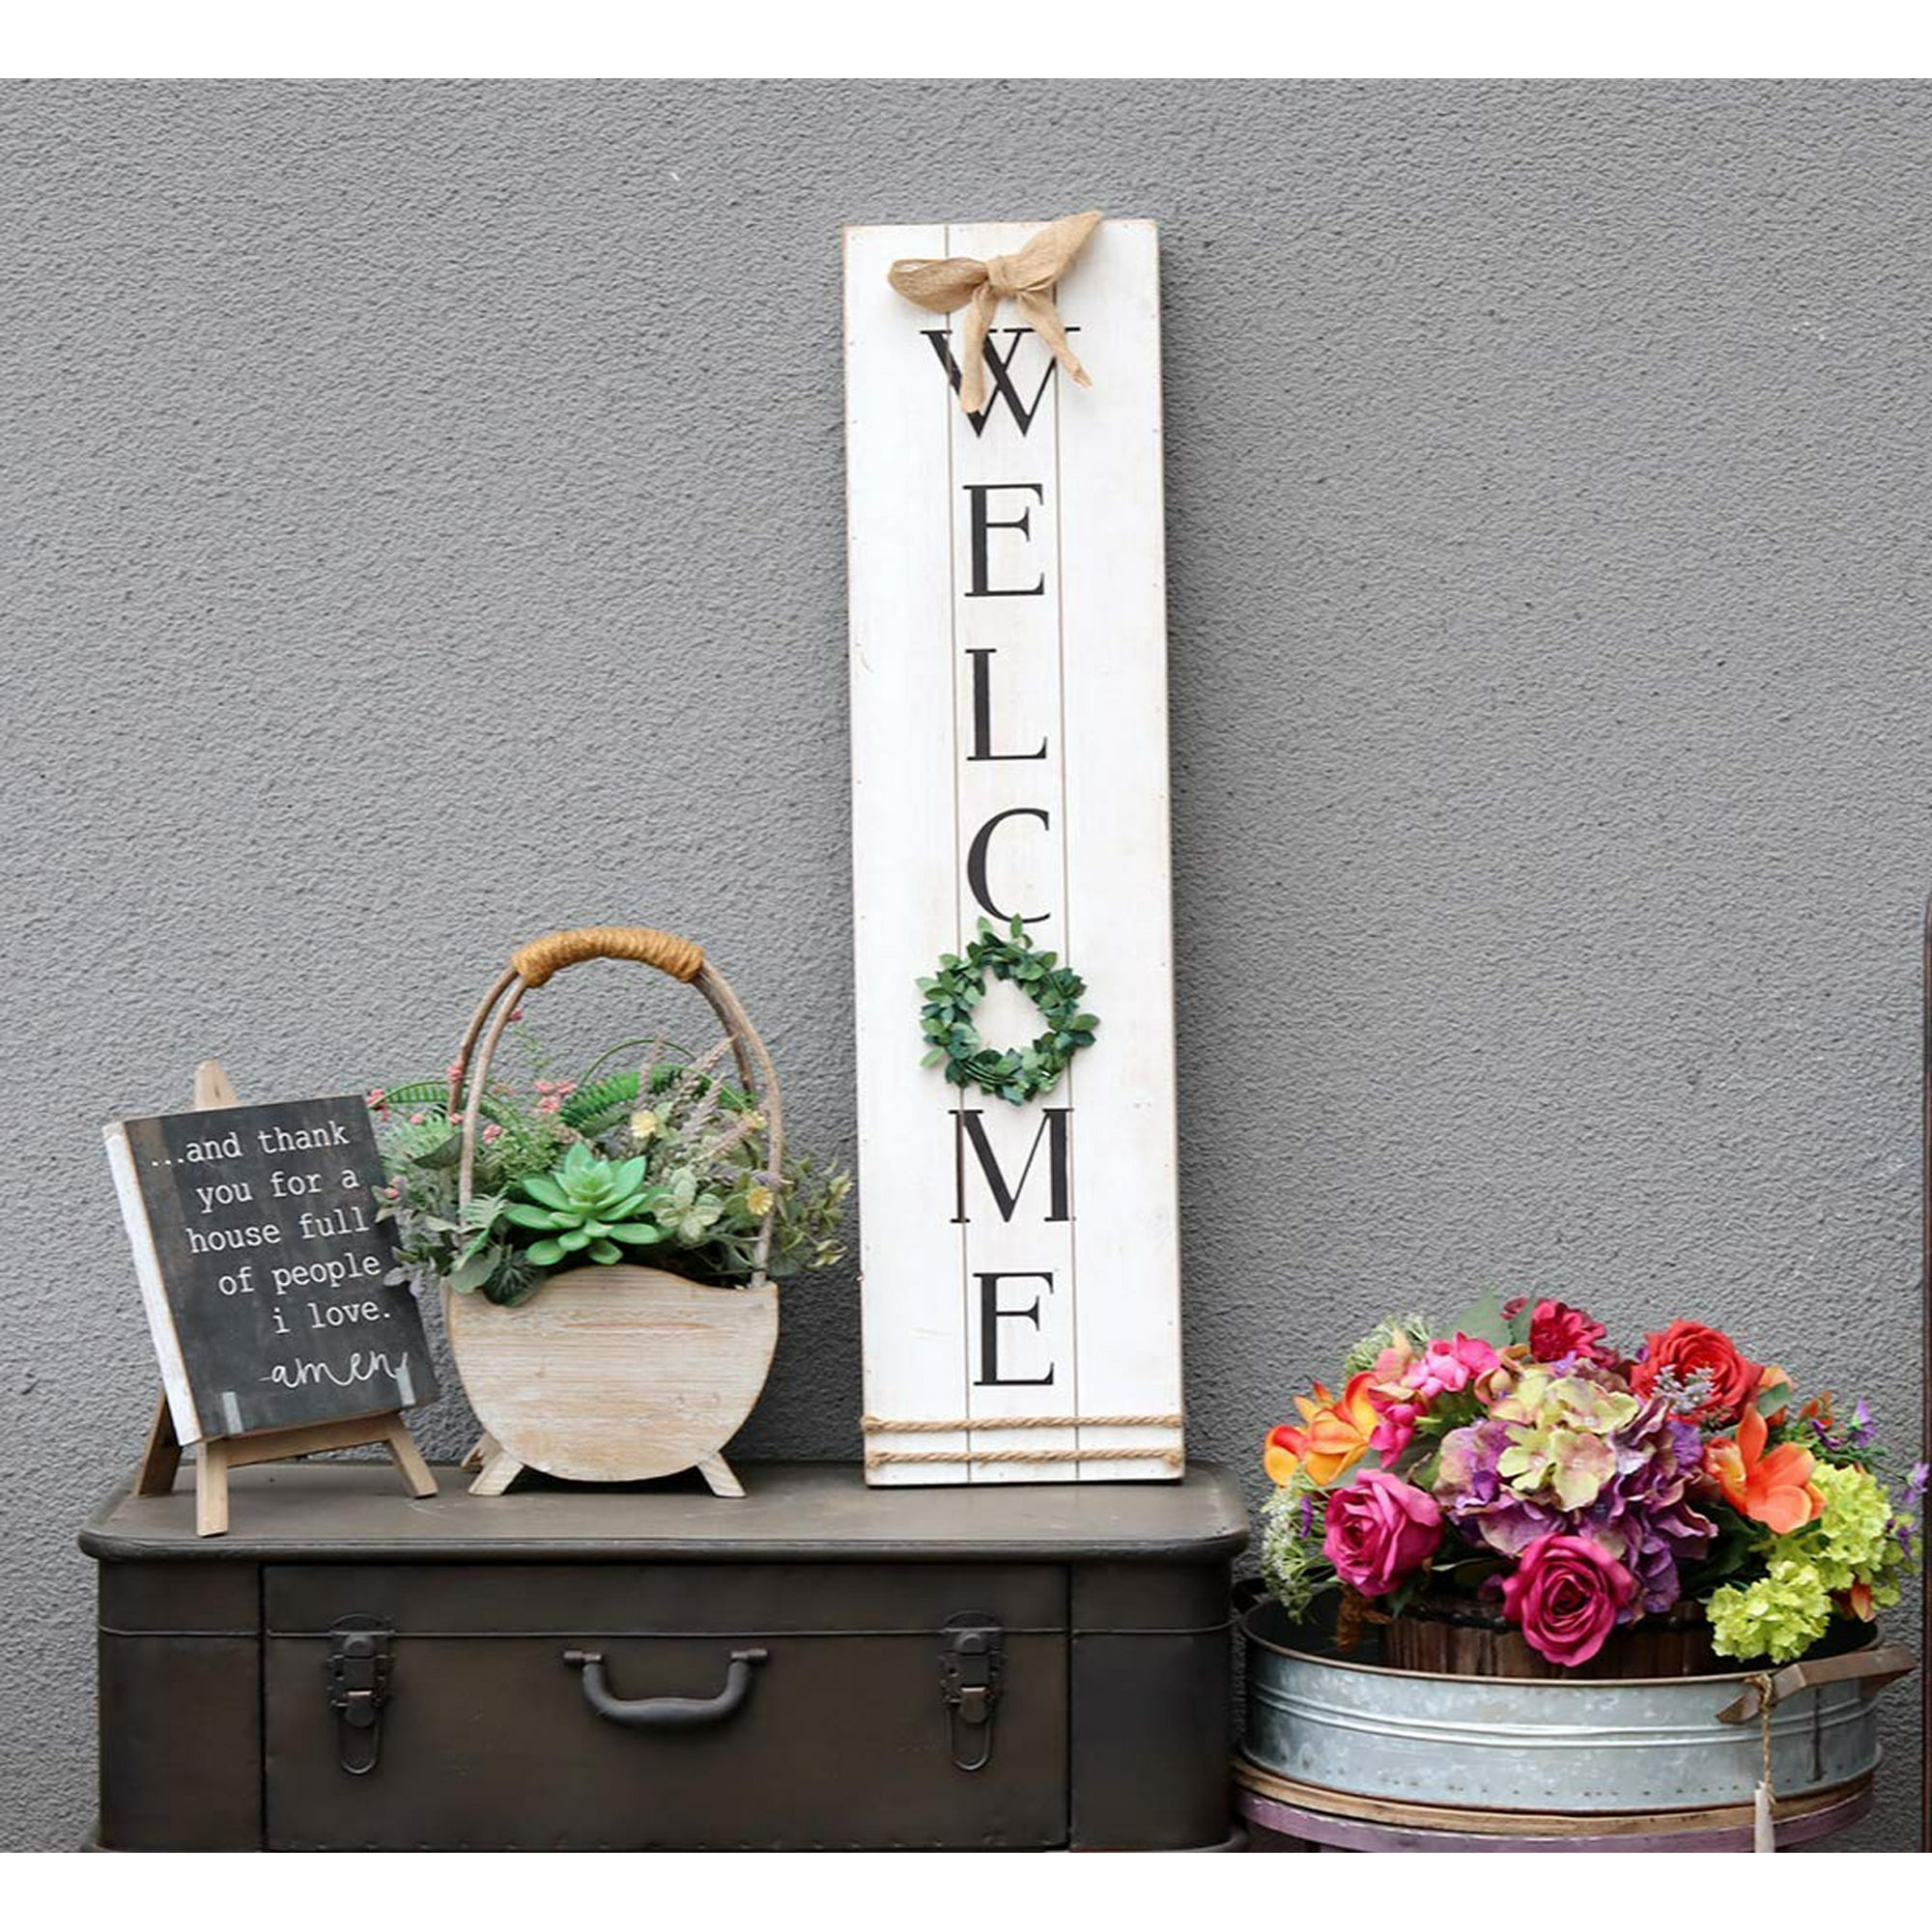 Parisloft Vertical Wooden Welcome Sign Plaque With Wreath Wall Hanging Decor Large Farmhouse Decor For Entryway Front Door Walmart Canada